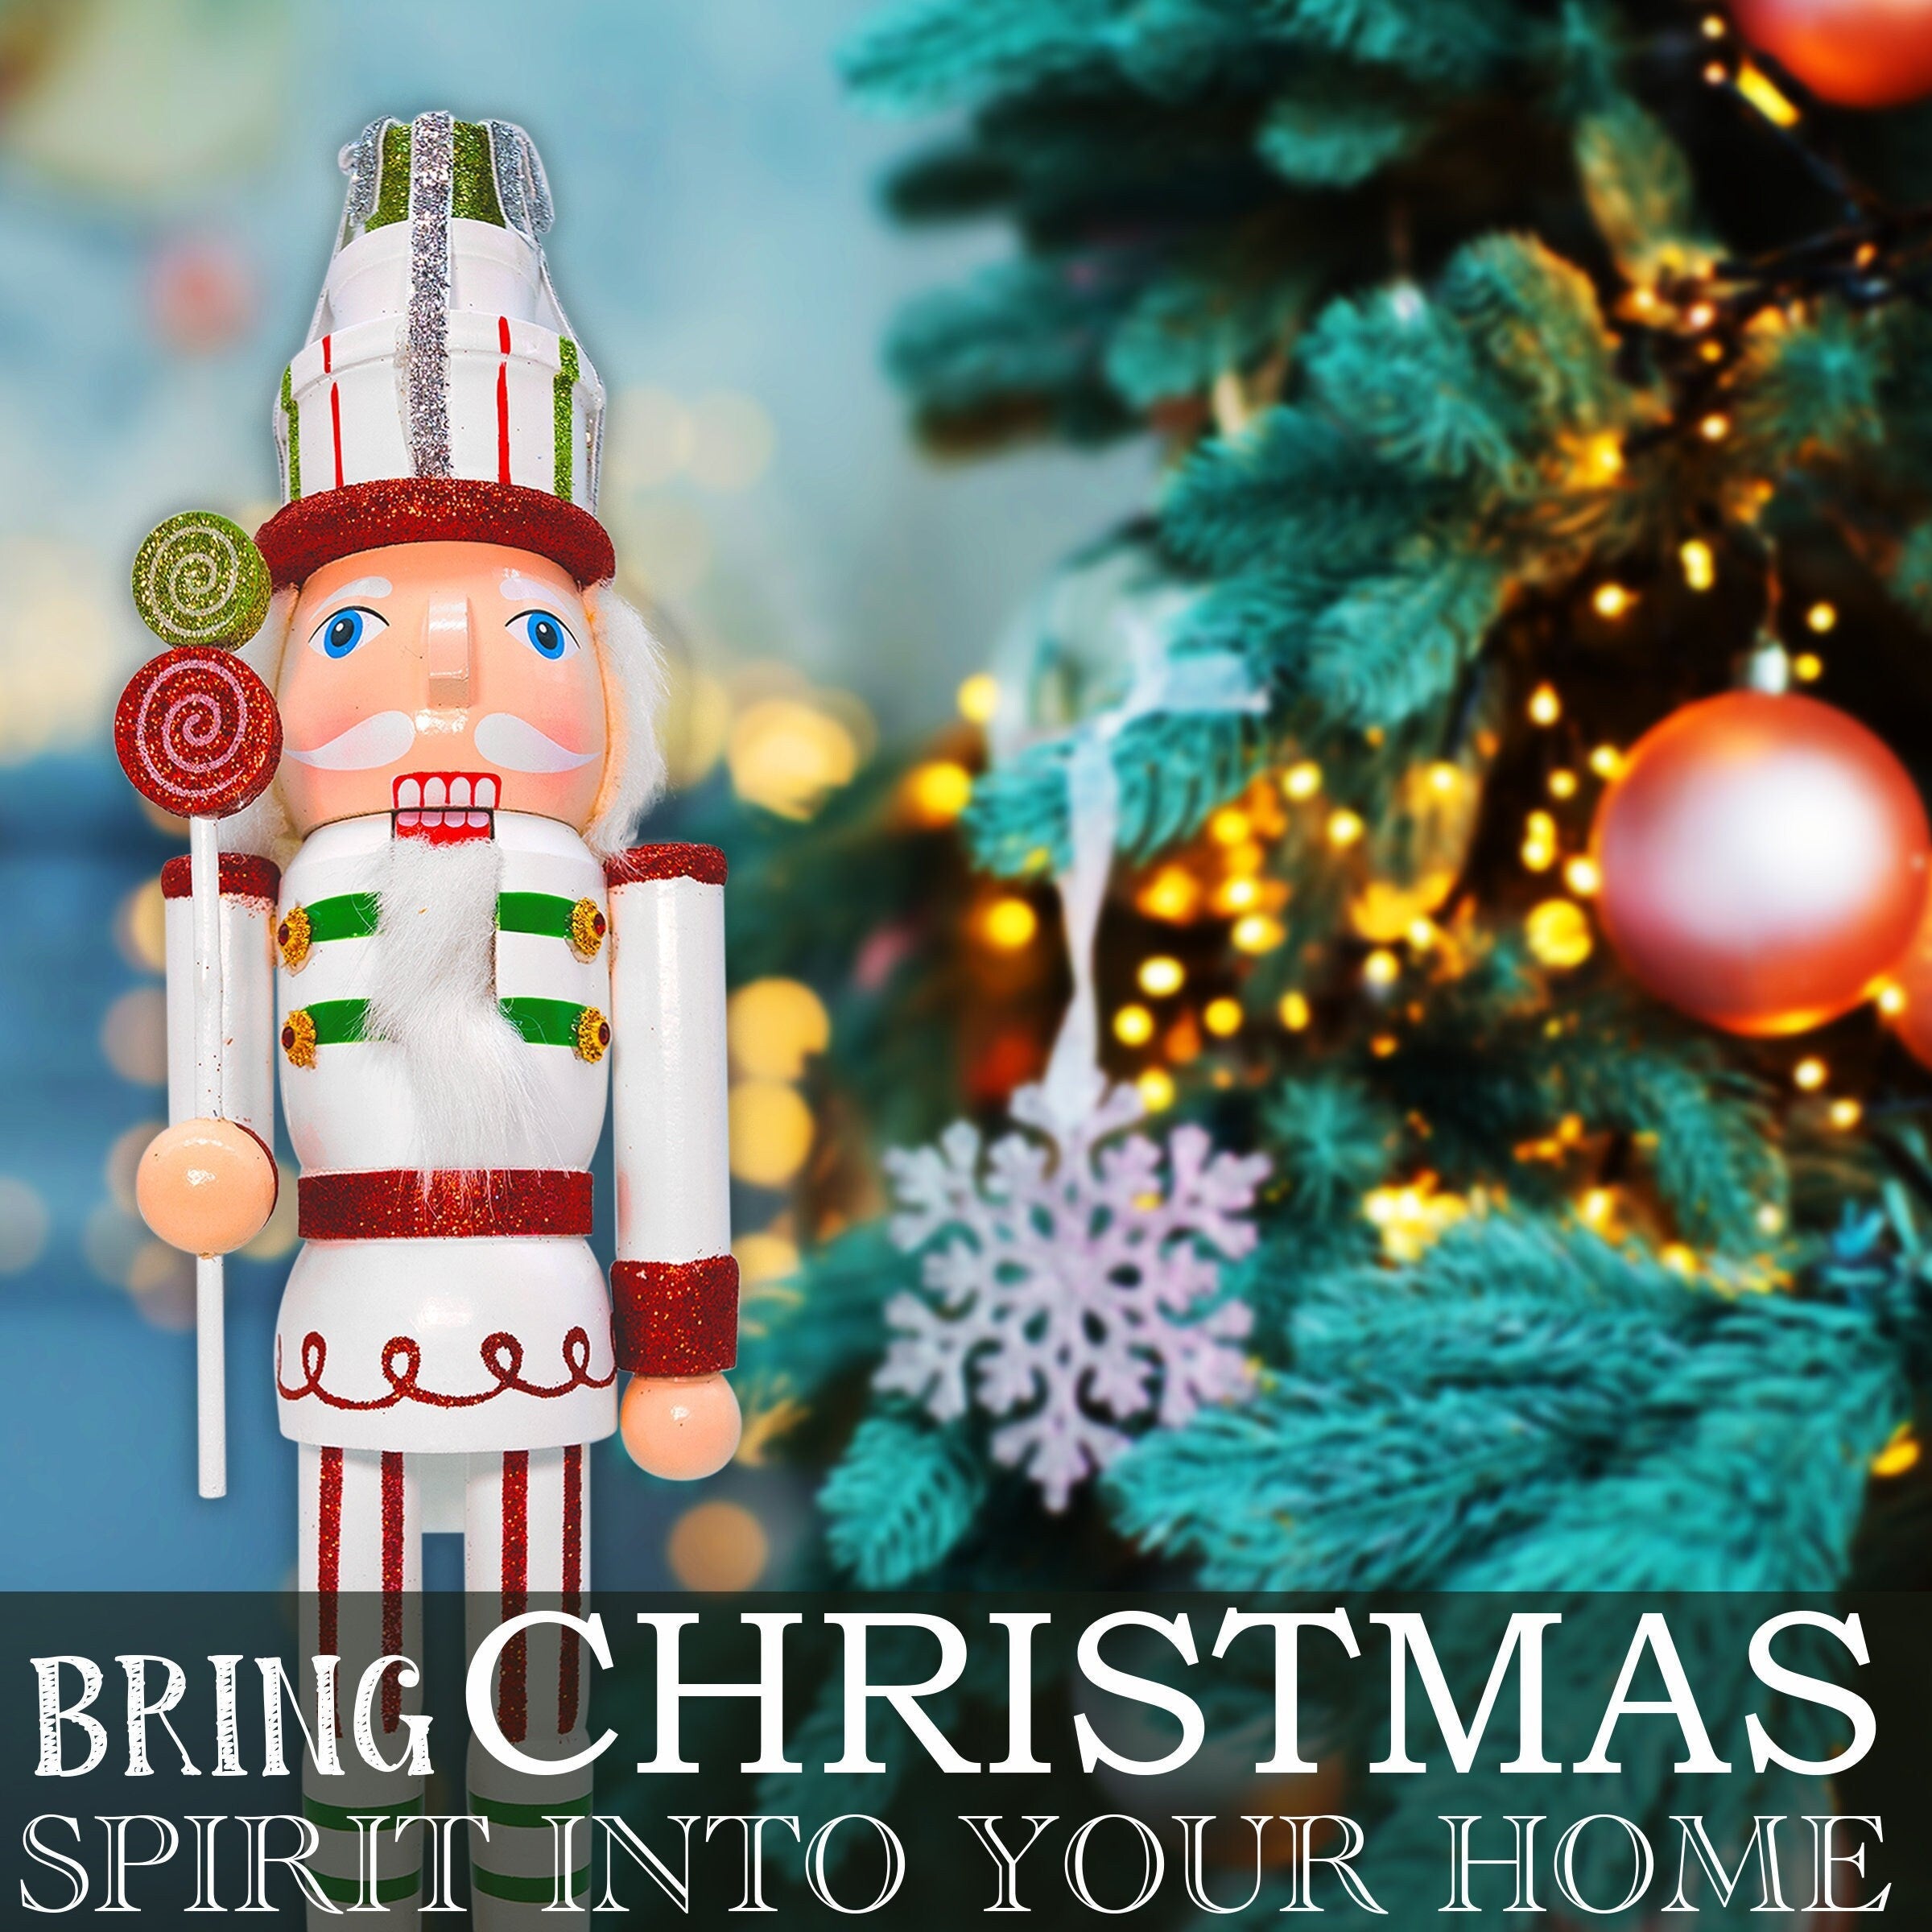 14-inch-Wooden-Nutcrackers-(Green-Candy-Cane-Solider)Christmas-Decoration-Figures-Nutcrackers